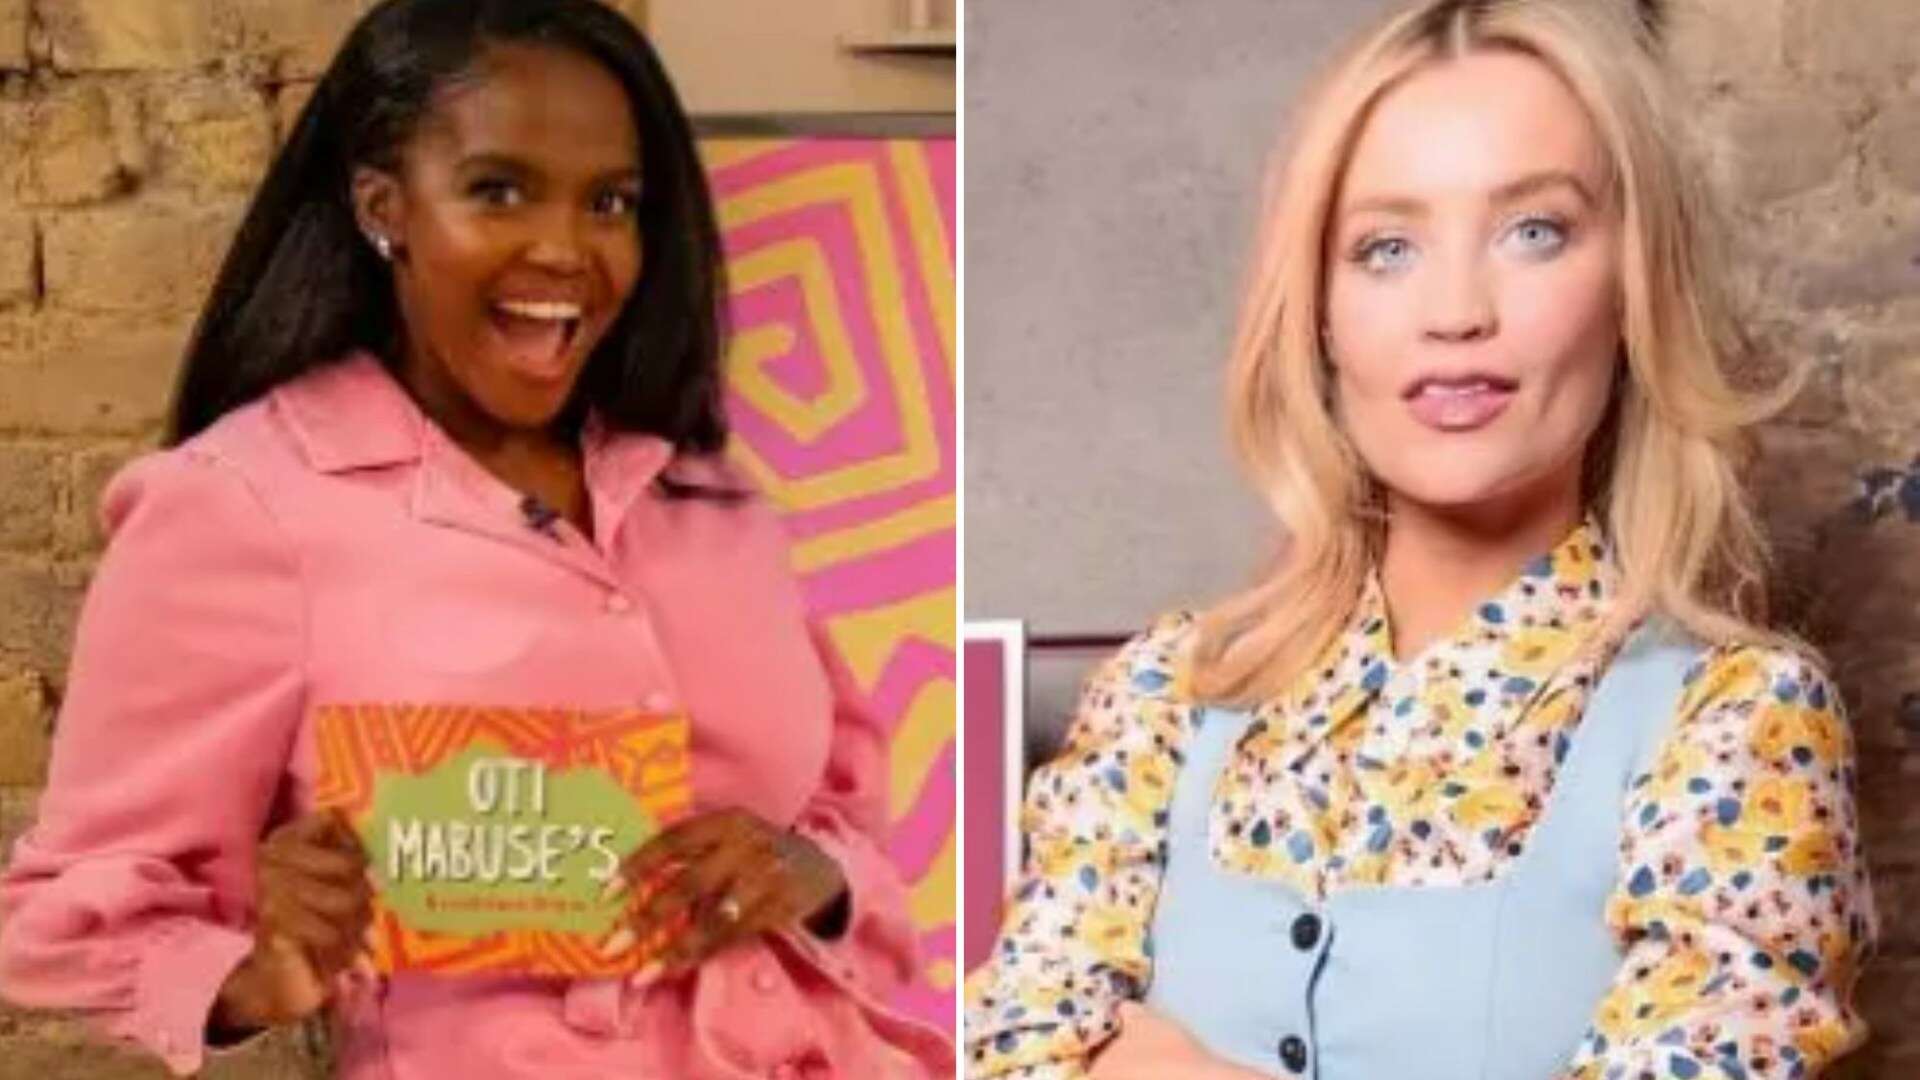 Laura Whitmore and Oti Mabuse's ITV shows axed in daytime schedule shake-up